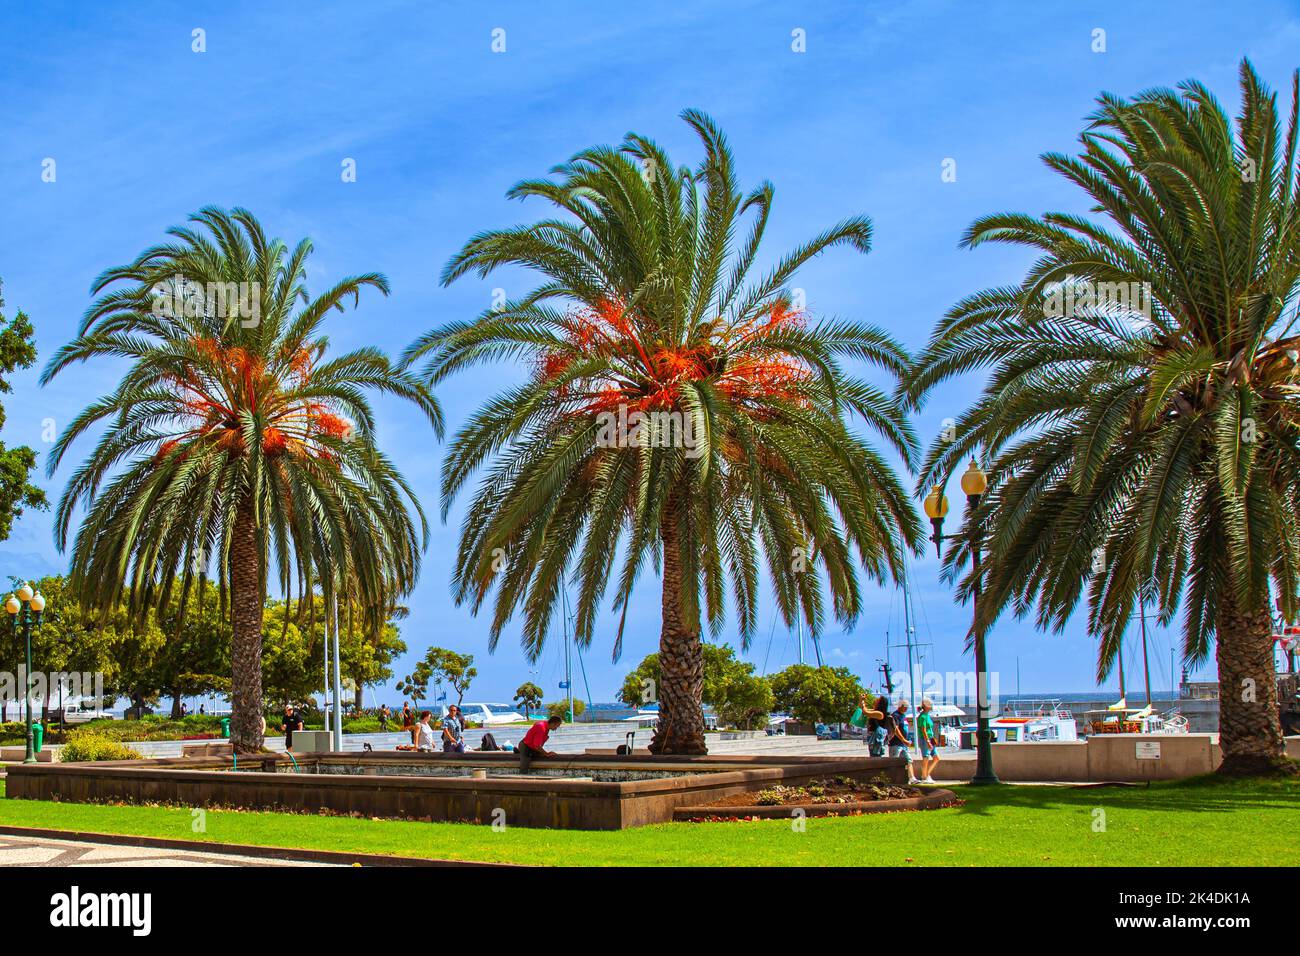 Date palms on the promenade at the port of Funchal, Madeira, Portugal,Europe Stock Photo